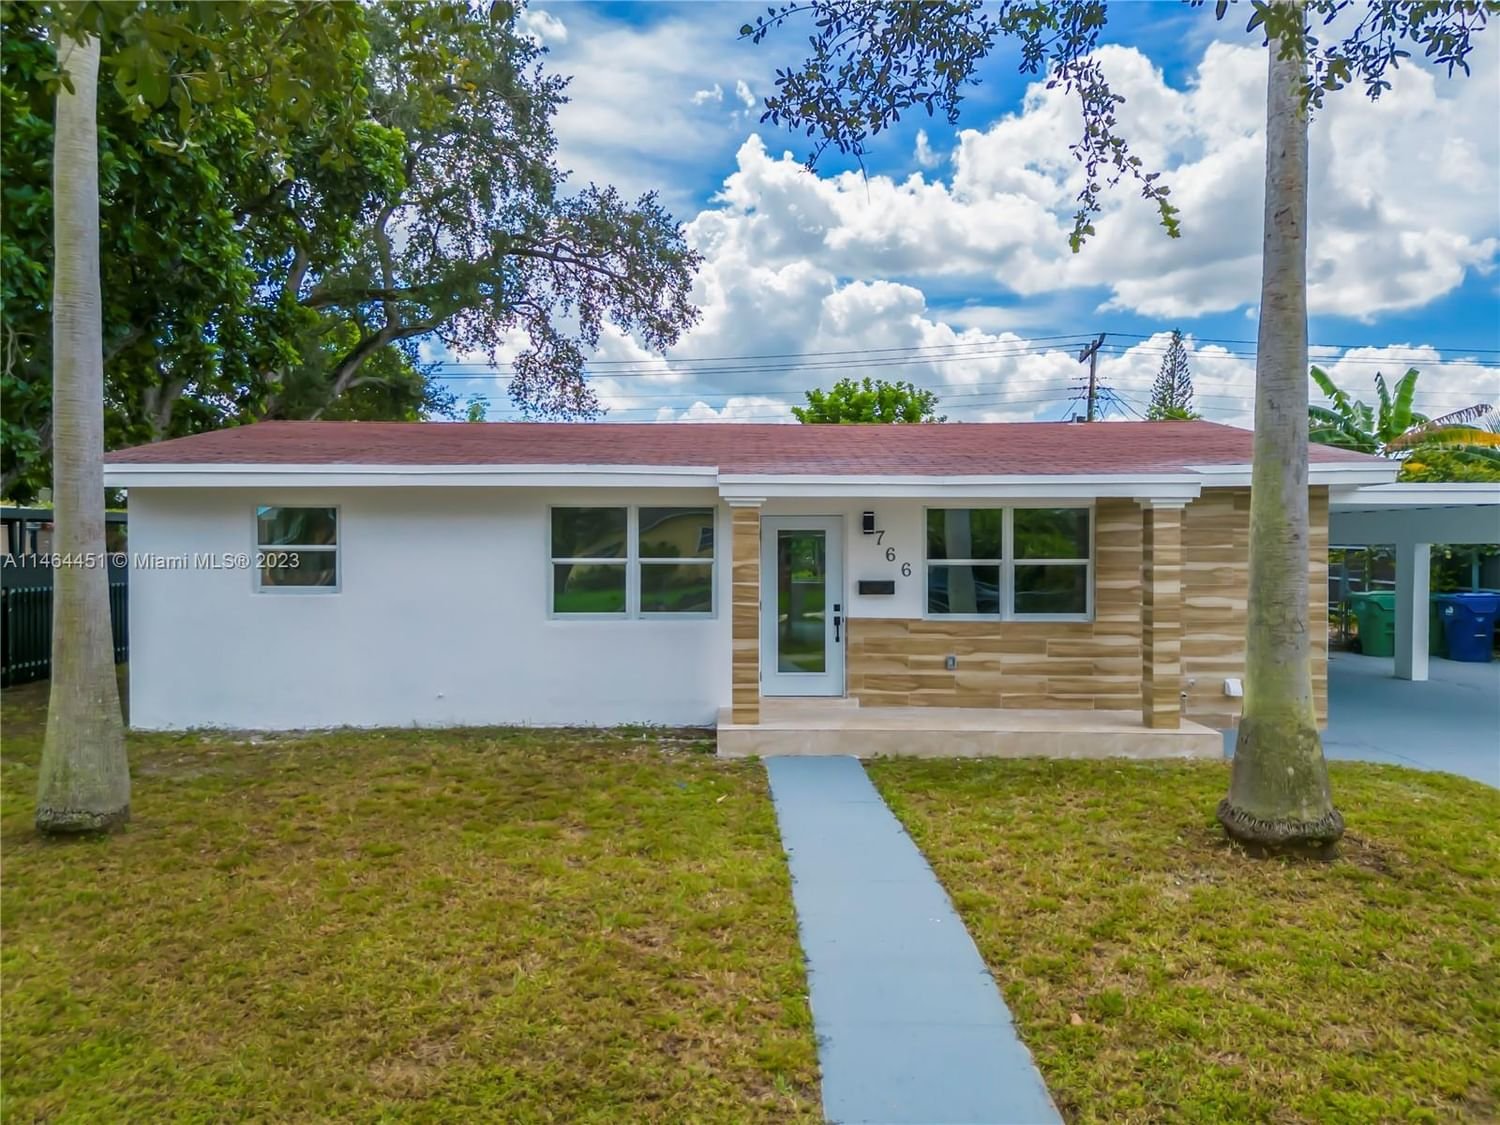 Real estate property located at 766 200th St, Miami-Dade County, SIERRA MIRADA 3RD ADDN RE, Miami Gardens, FL